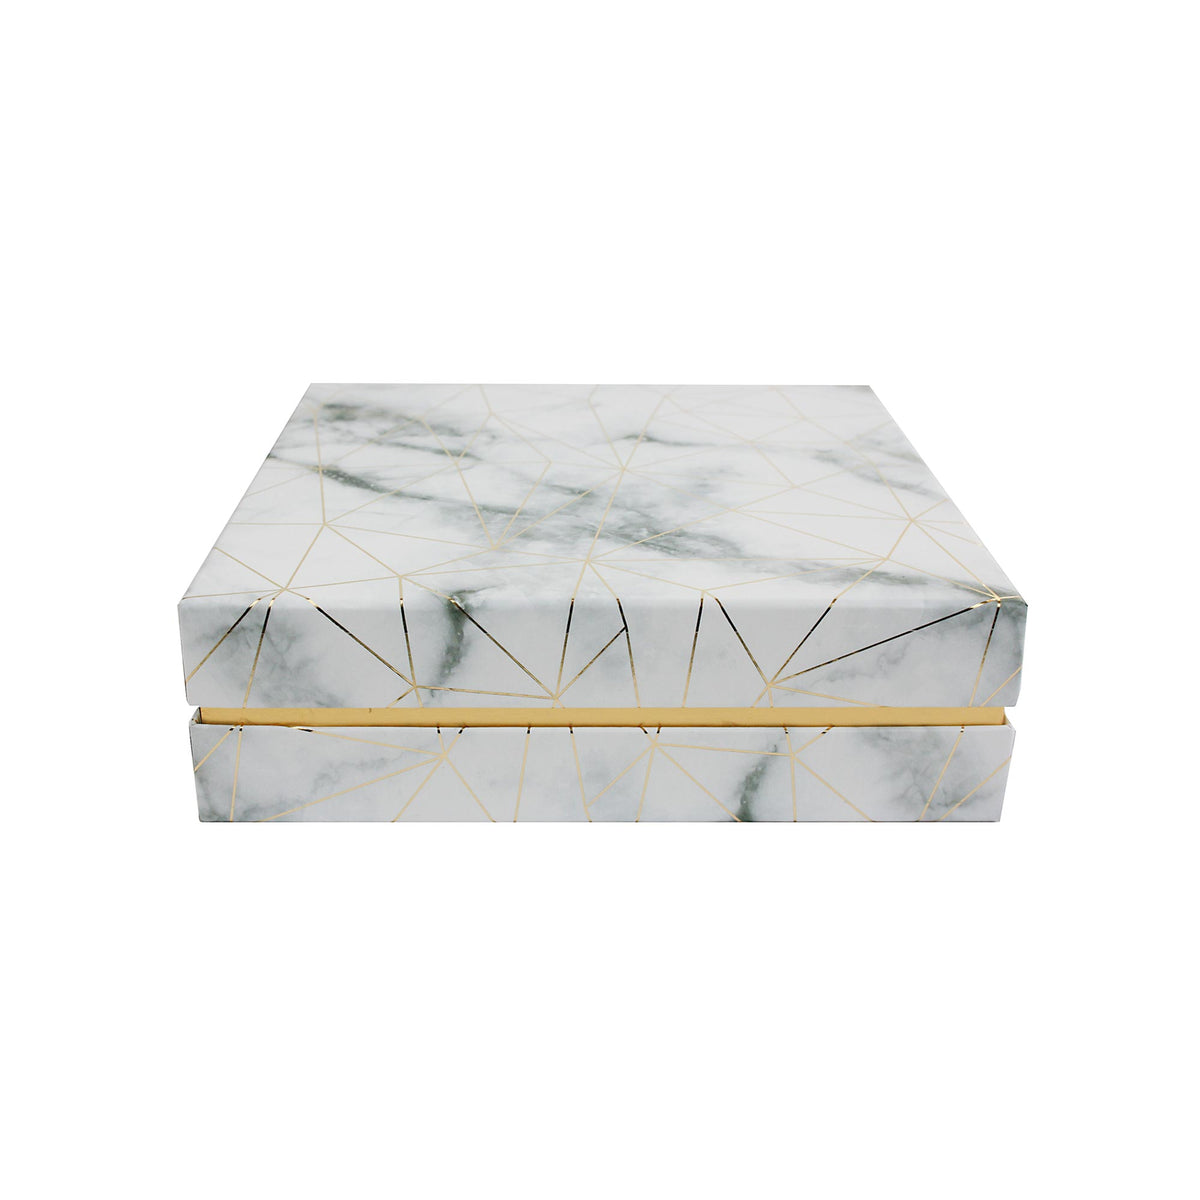 Single White Marble Print Gift Box (Sizes Available)